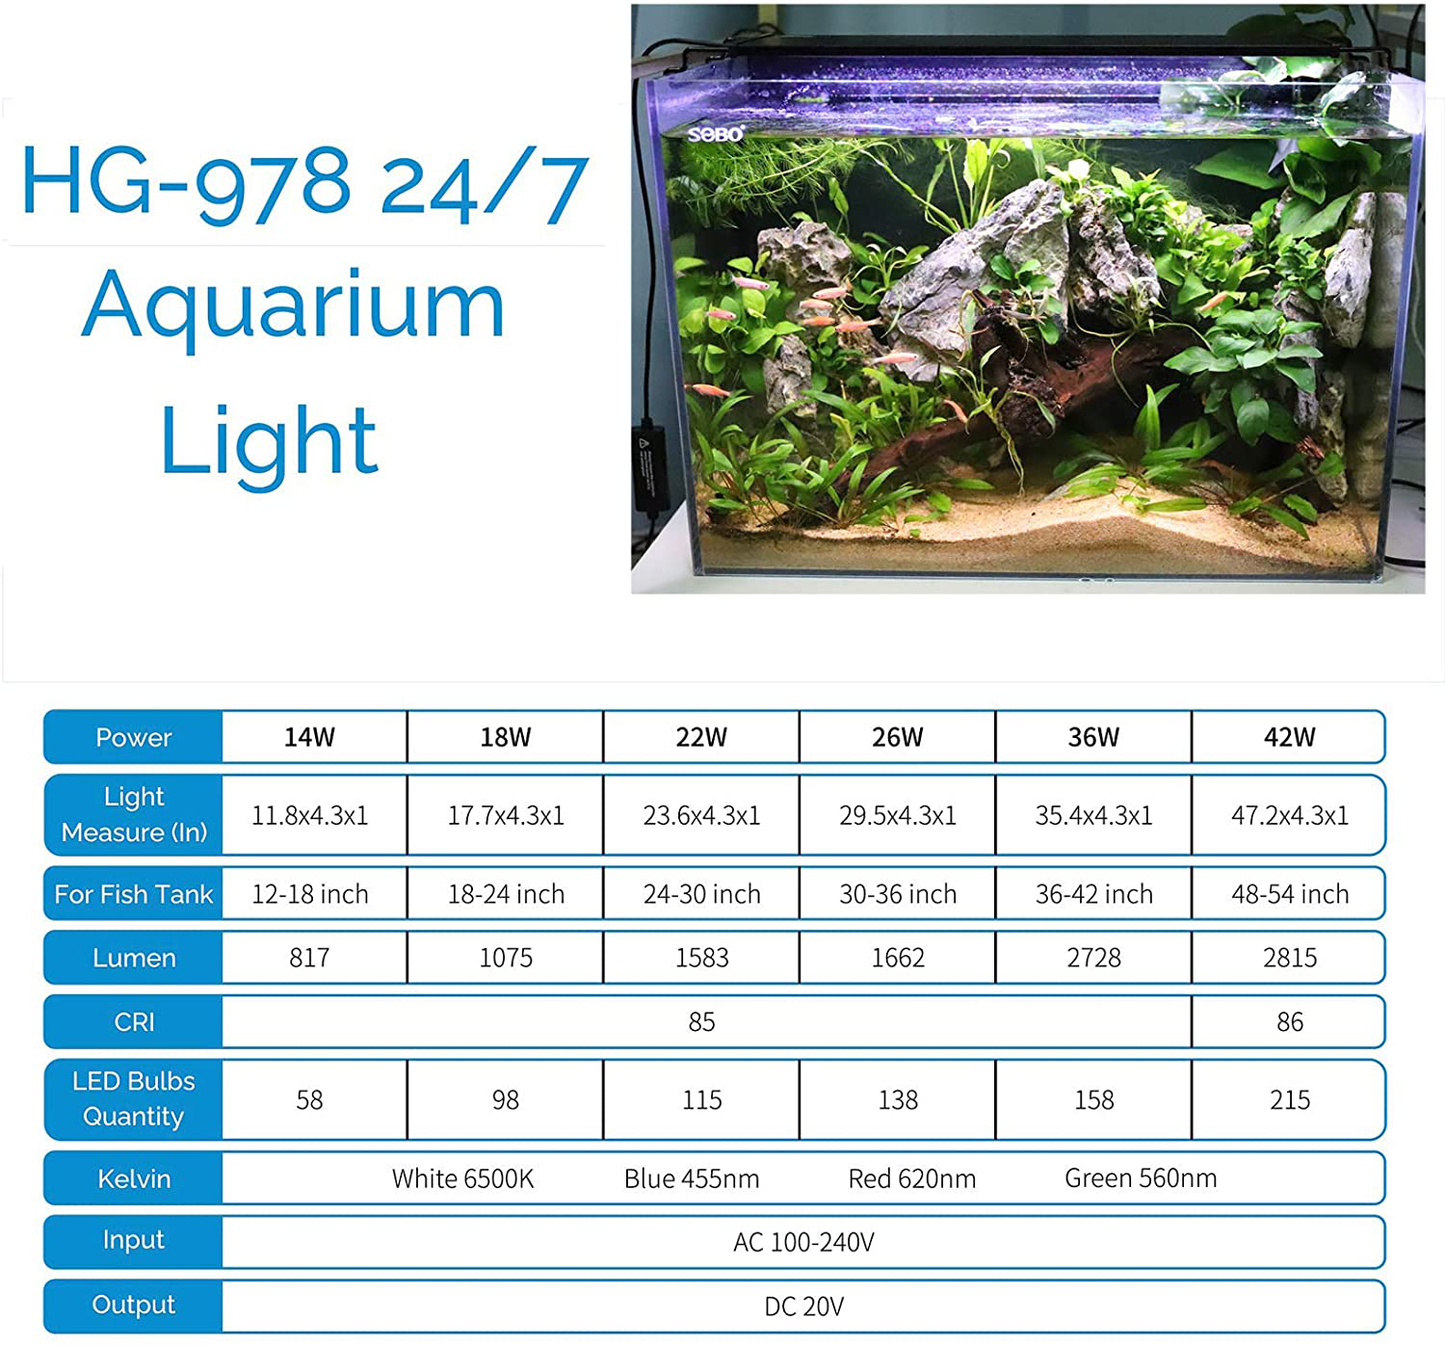 Hygger Advanced Full Spectrum LED Aquarium Light with 24/7 Lighting Cycle 6 Colors 5 Intensity Customize Fish Tank Light for 48-54 in Freshwater Planted Tank with Timer